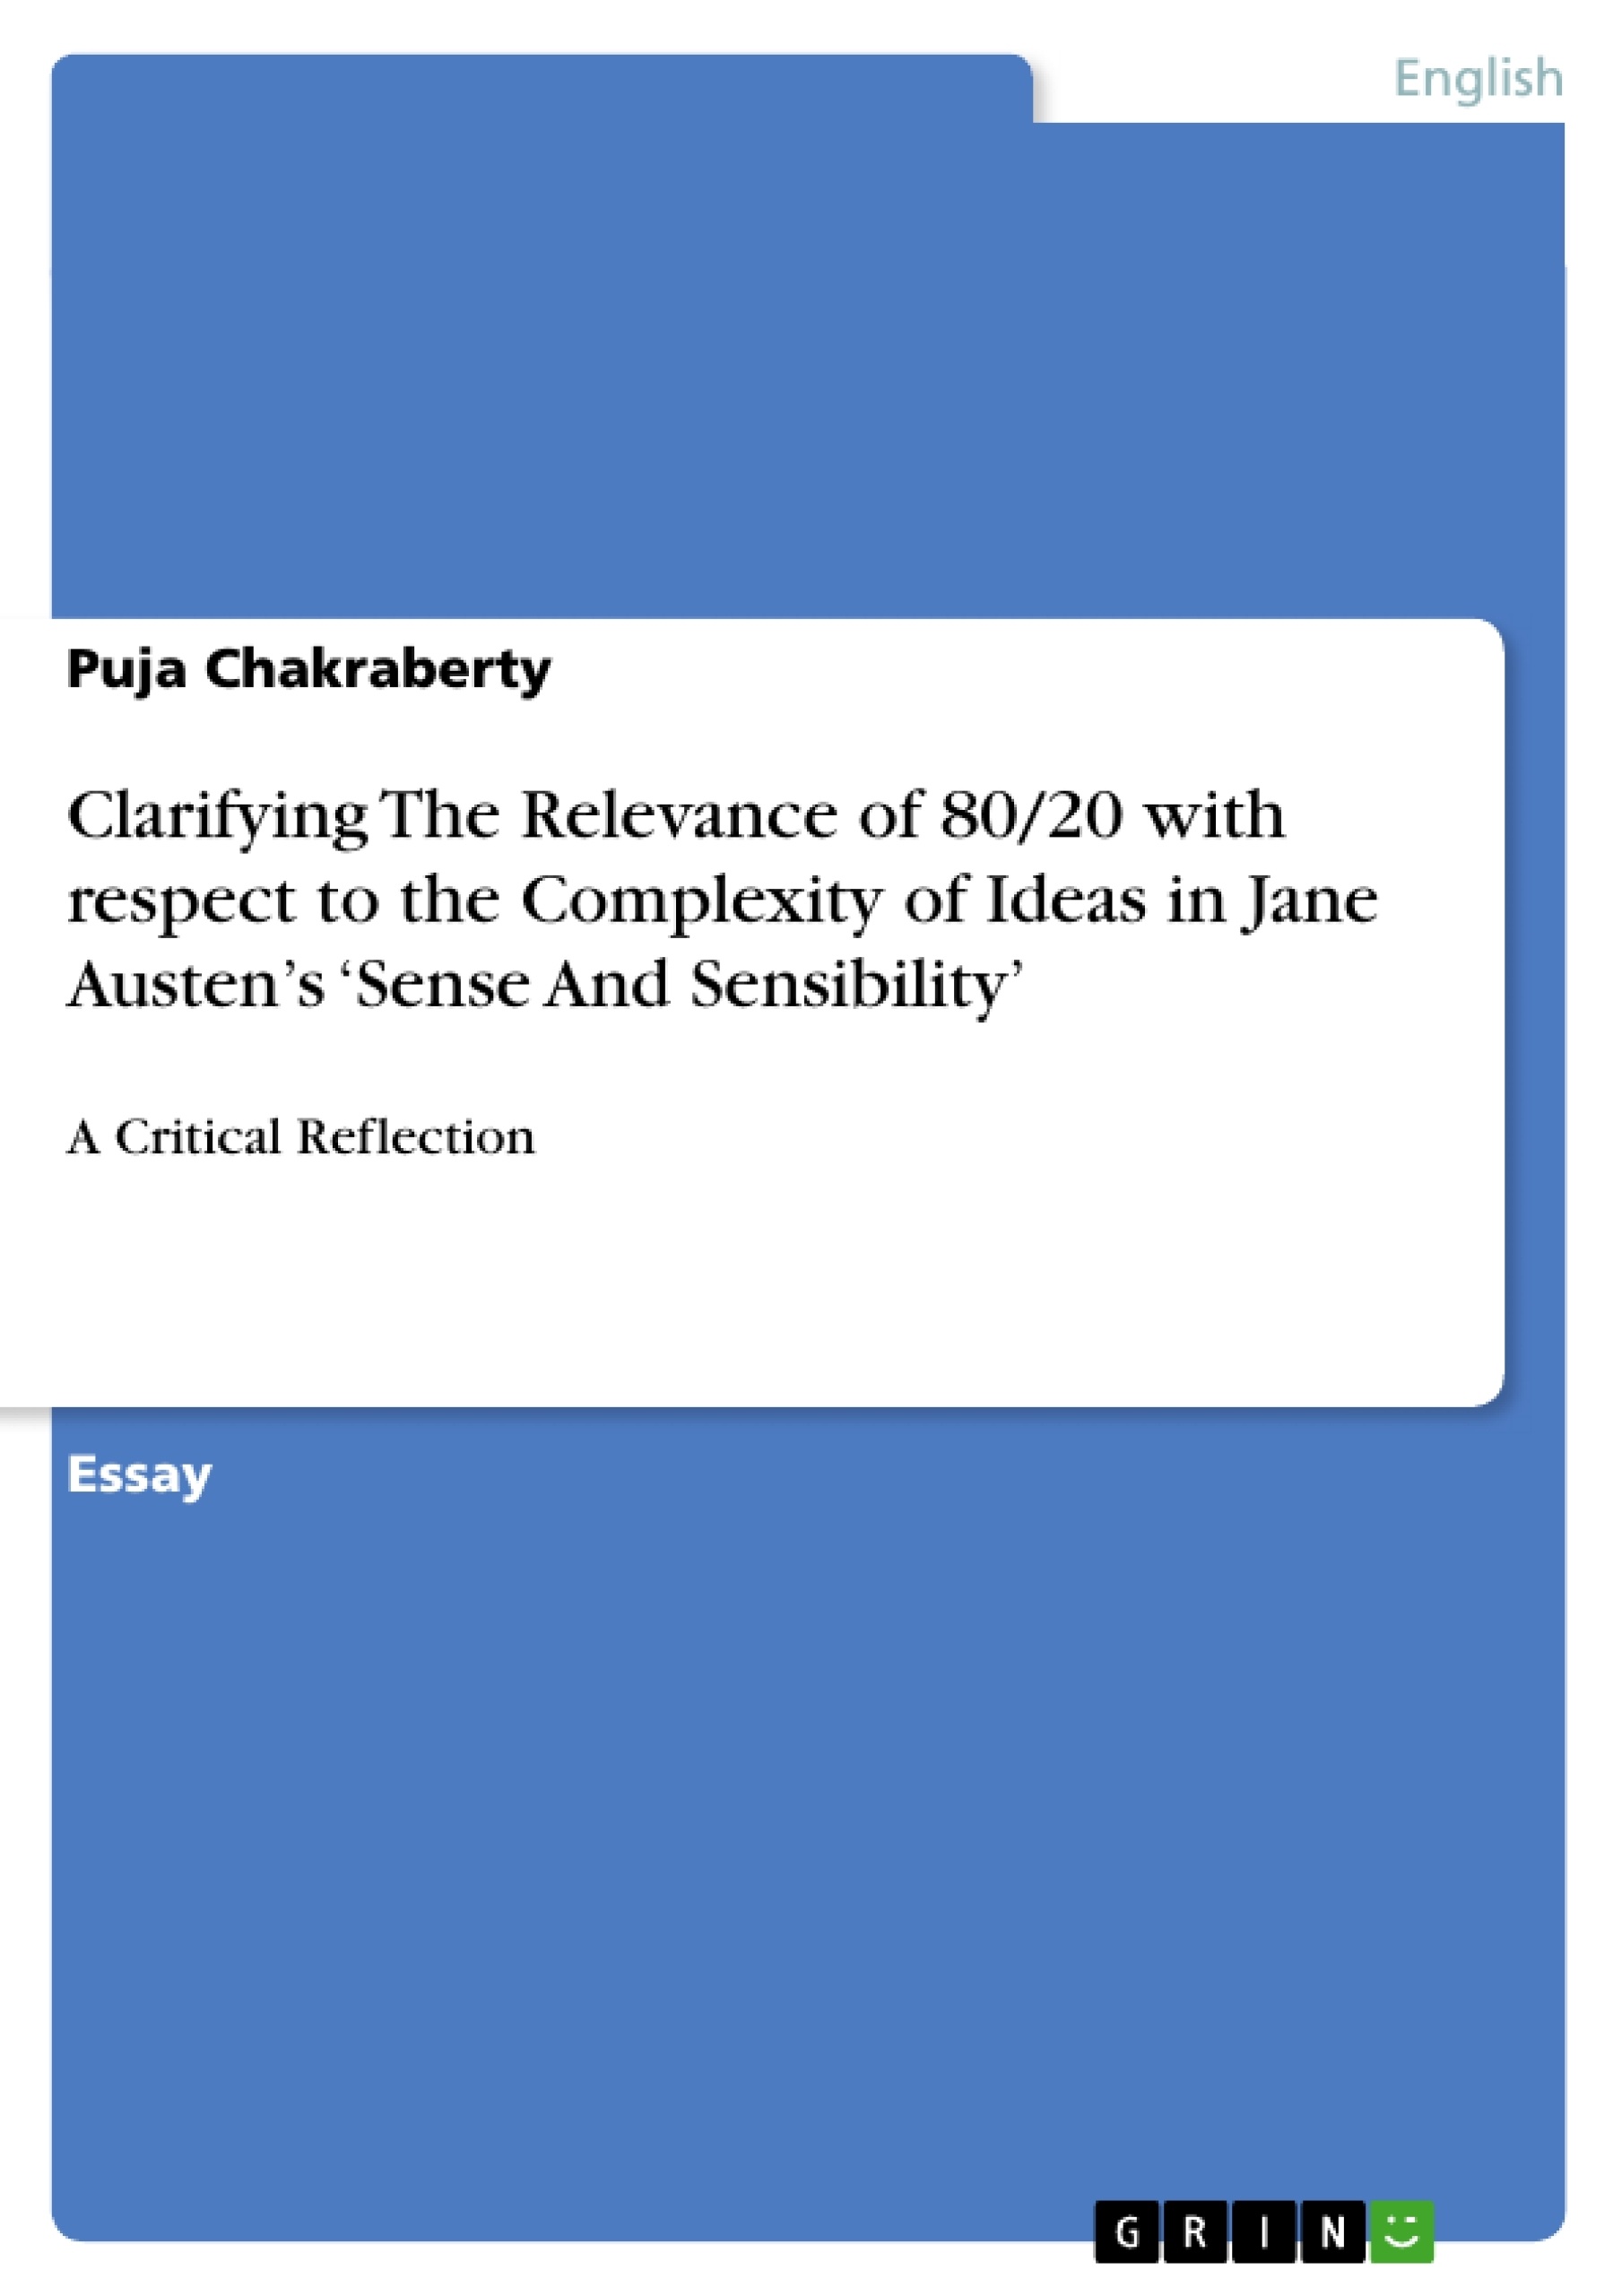 Titre: Clarifying The Relevance of 80/20 with respect to the Complexity of Ideas in Jane Austen’s ‘Sense And Sensibility’